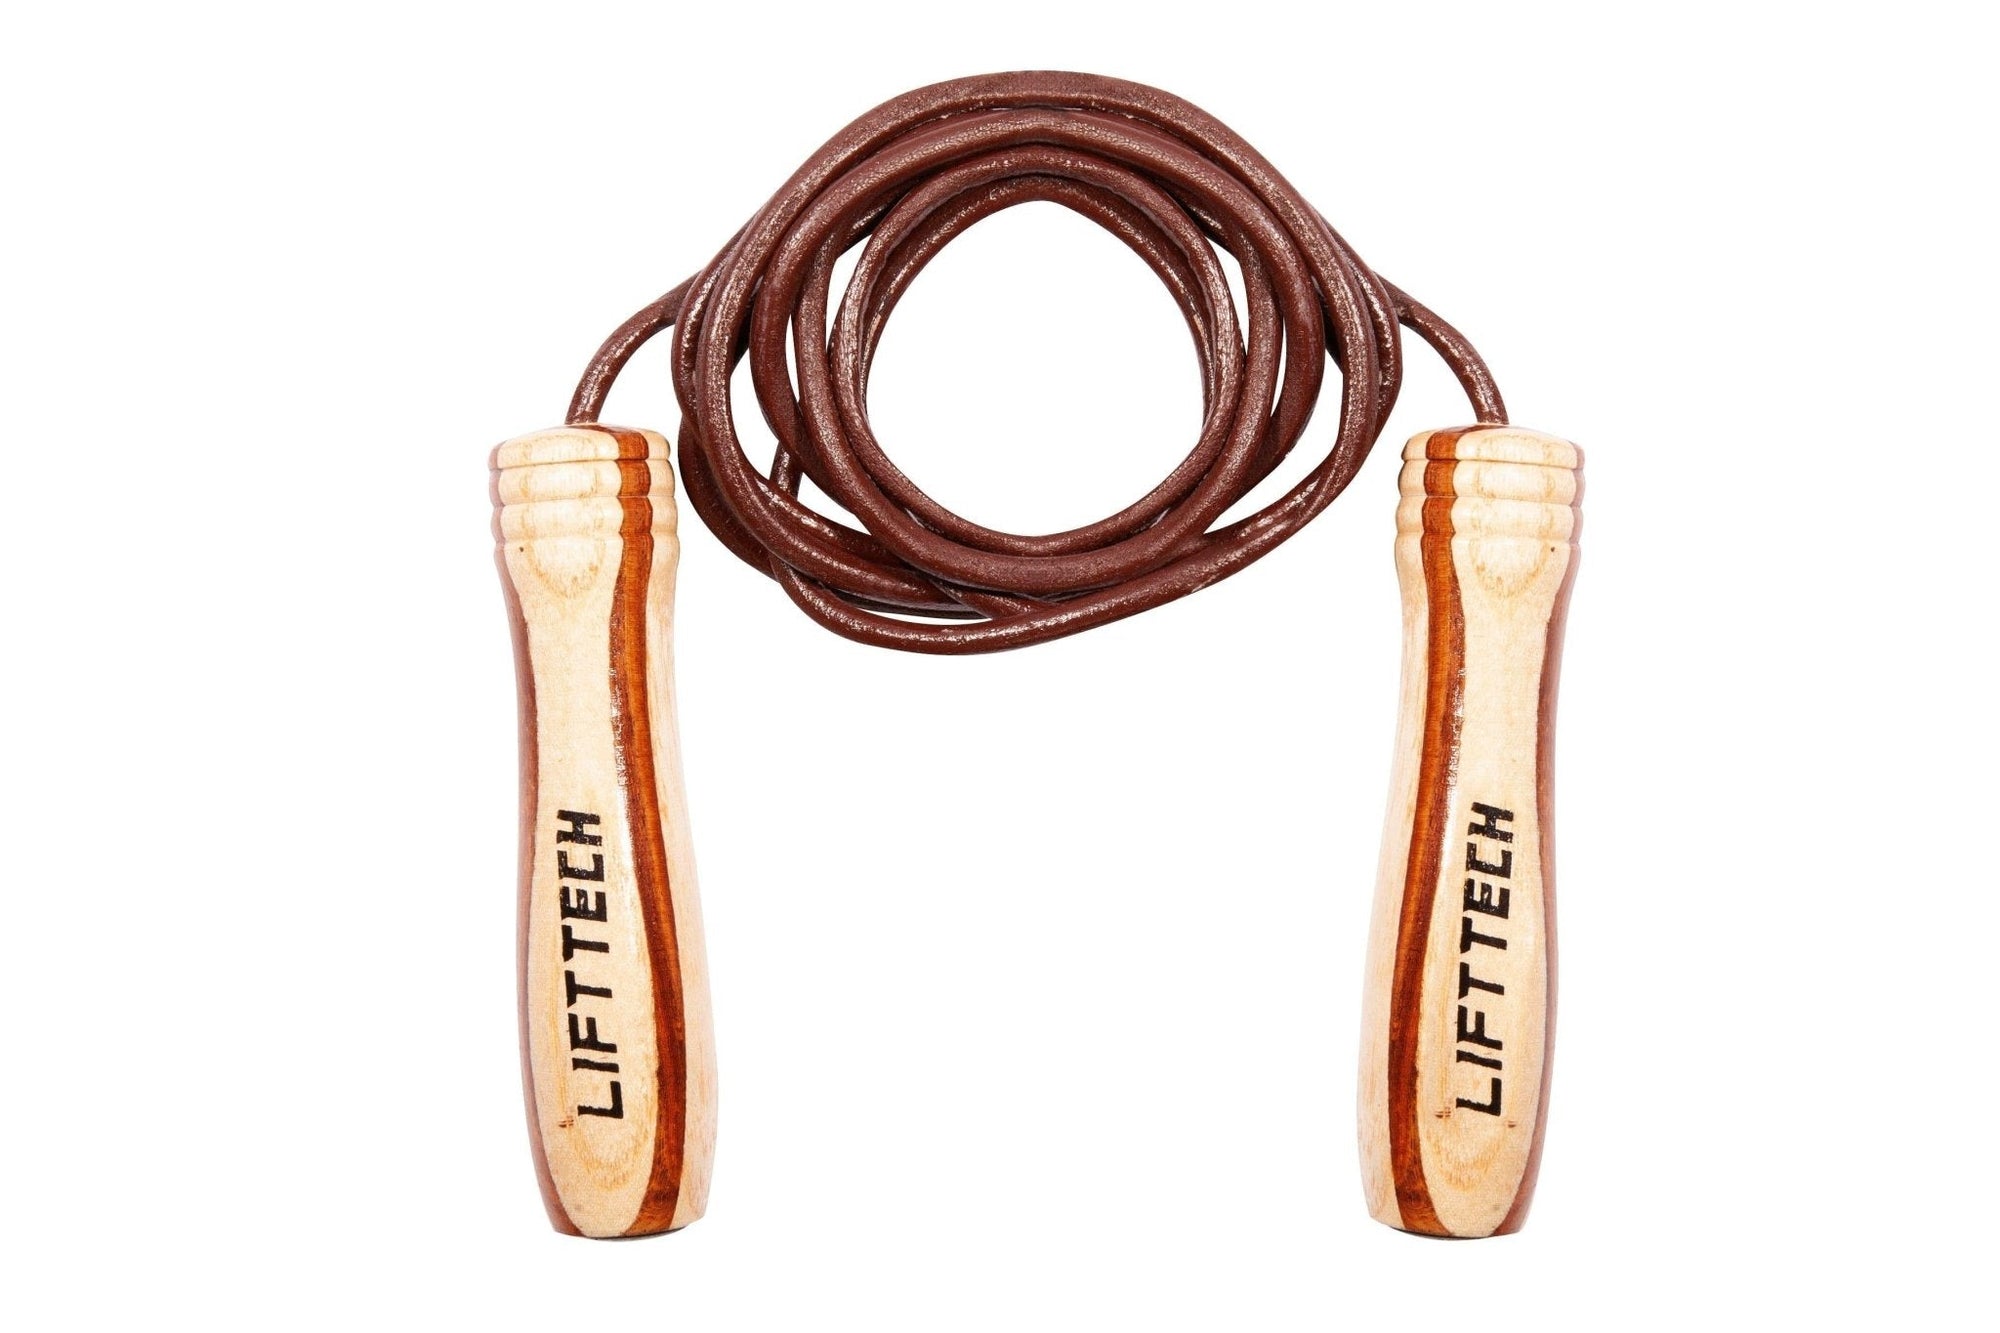 Lift Tech Fitness Elite Jump Rope Athletic Training Lift Tech Fitness 